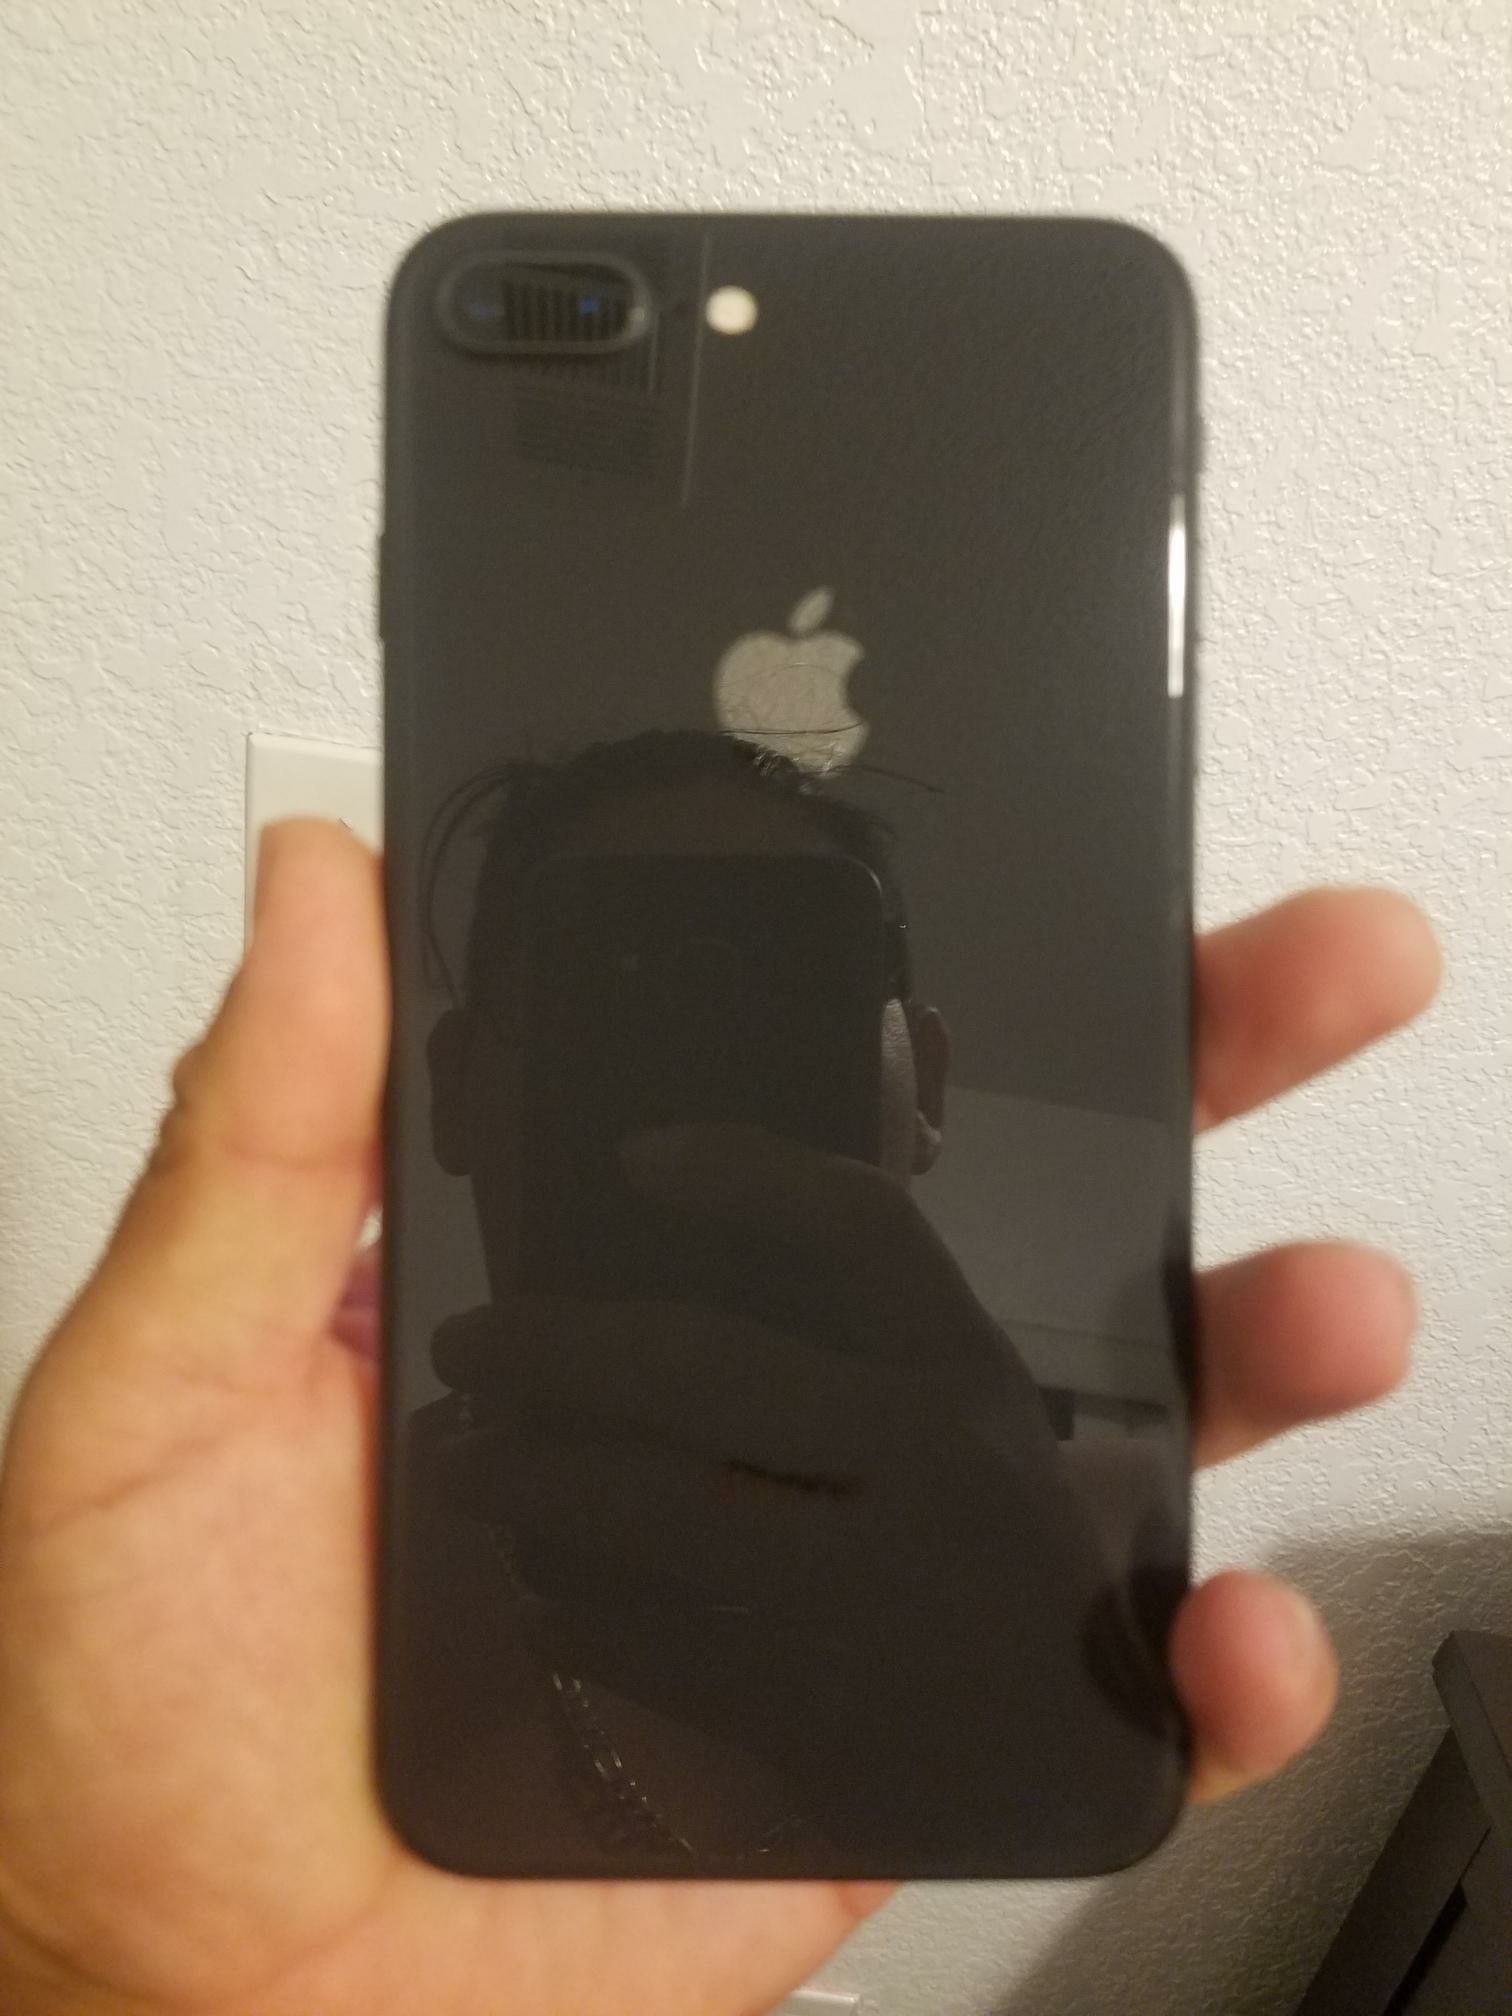 iphone 8 plus 64gb space gray unlocked for any cell carrier works in usa Mexico and overseas